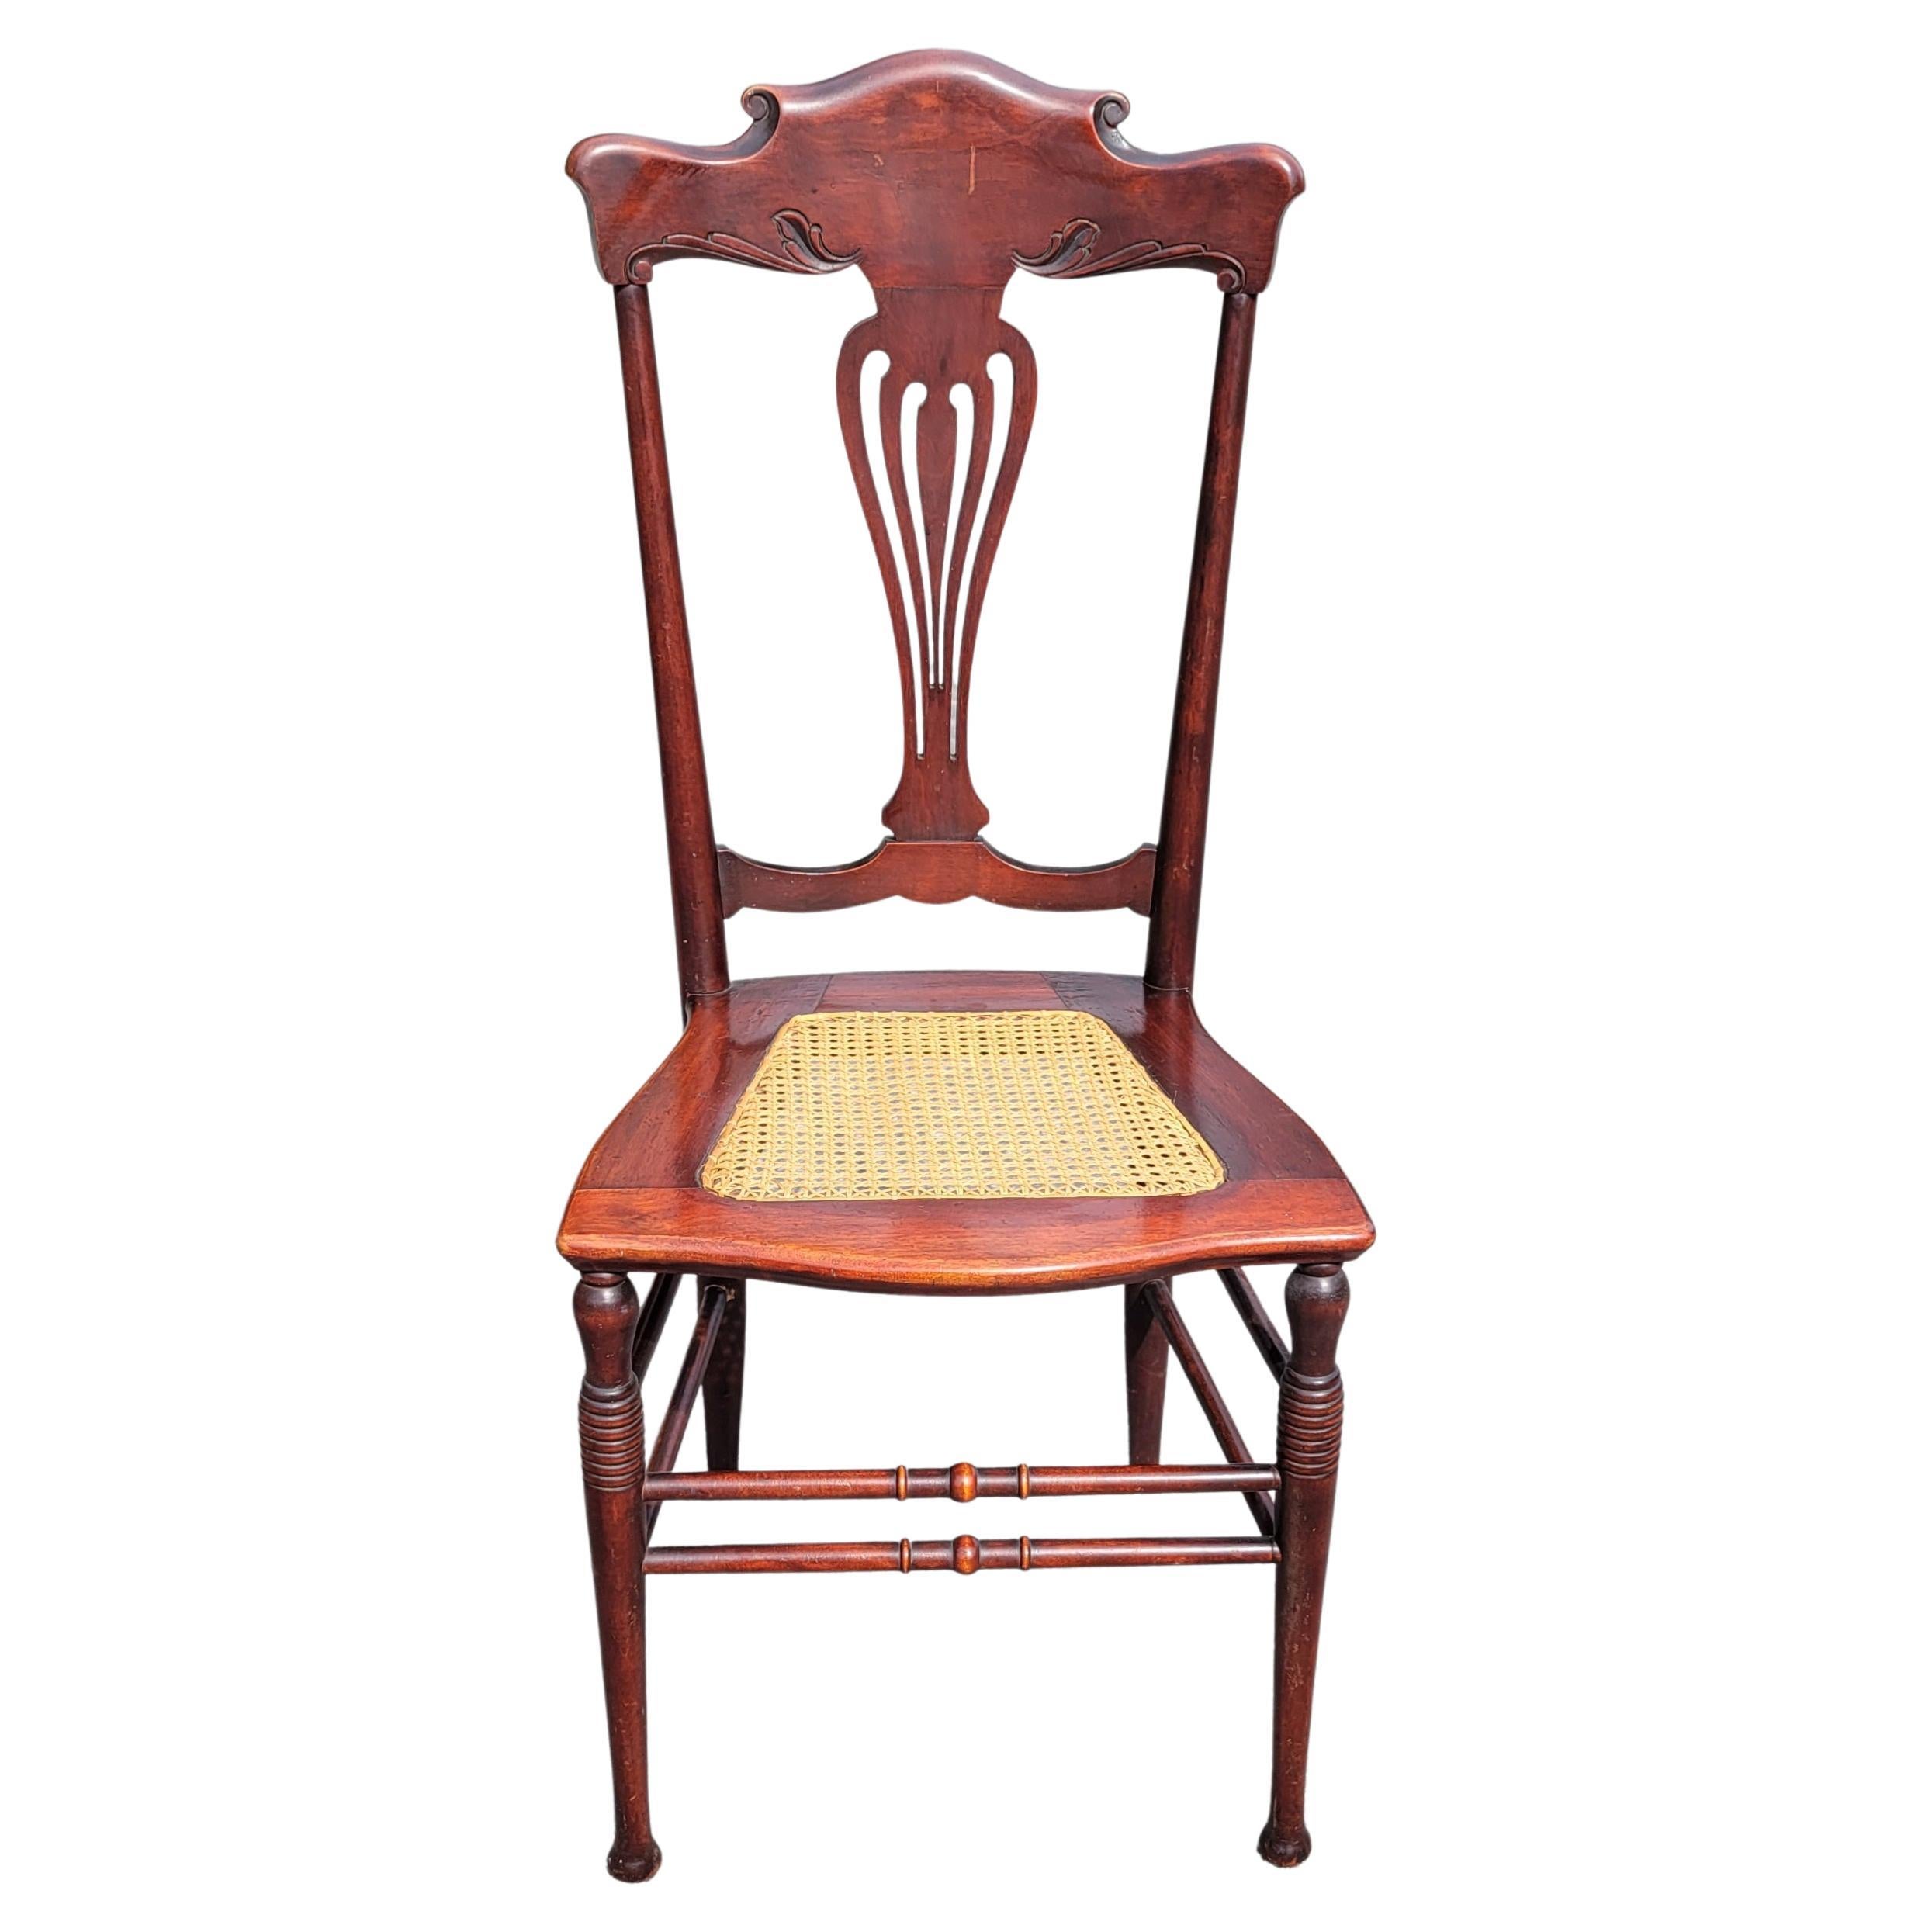 Refinished Early American Empire Mahogany and Cane Seat Chair